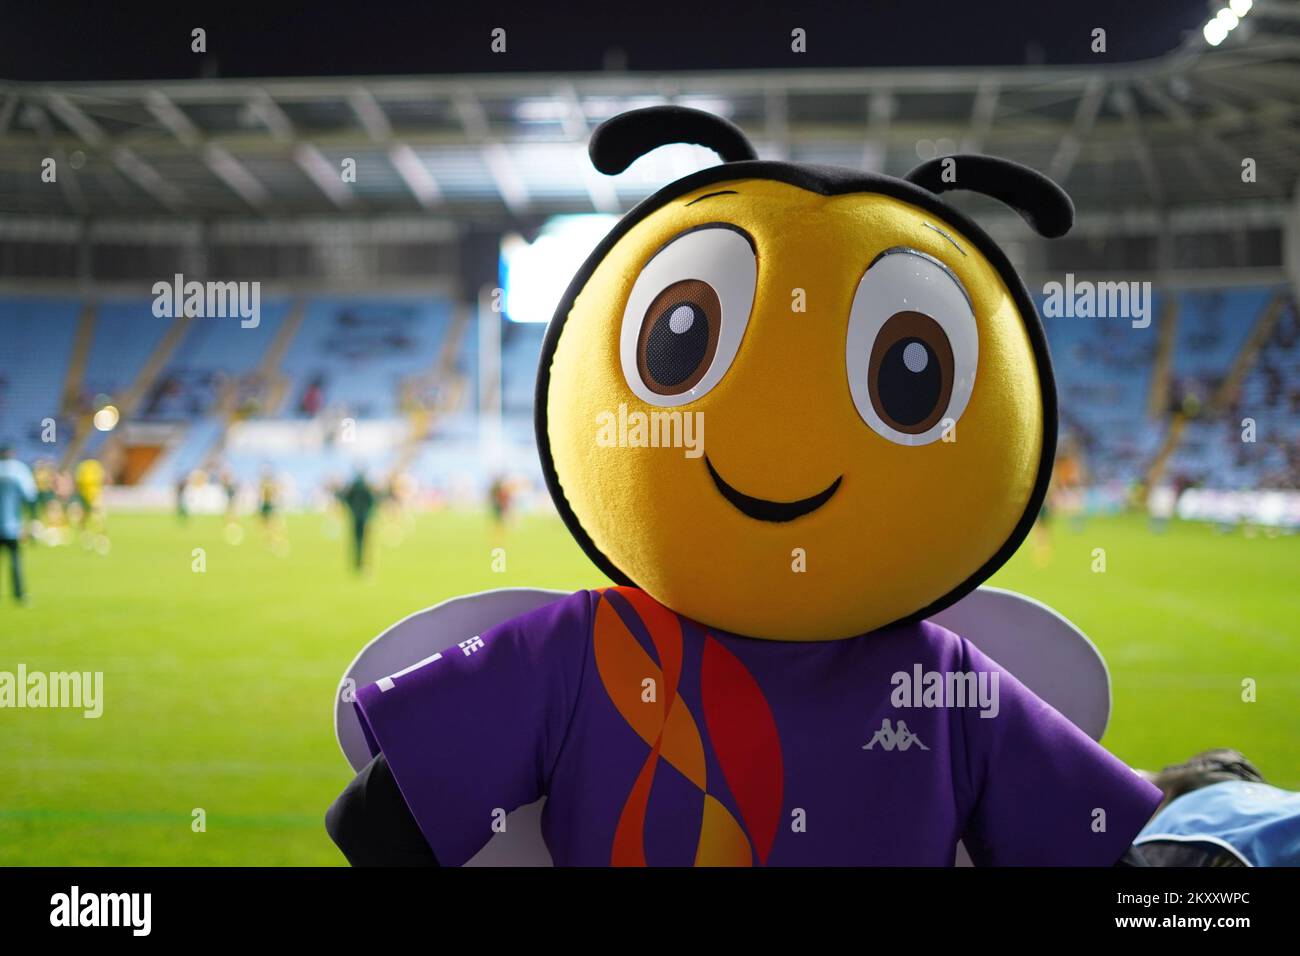 Rugby League World Cup mascot Rugbee at Coventry Arena, England October 2022 Stock Photo